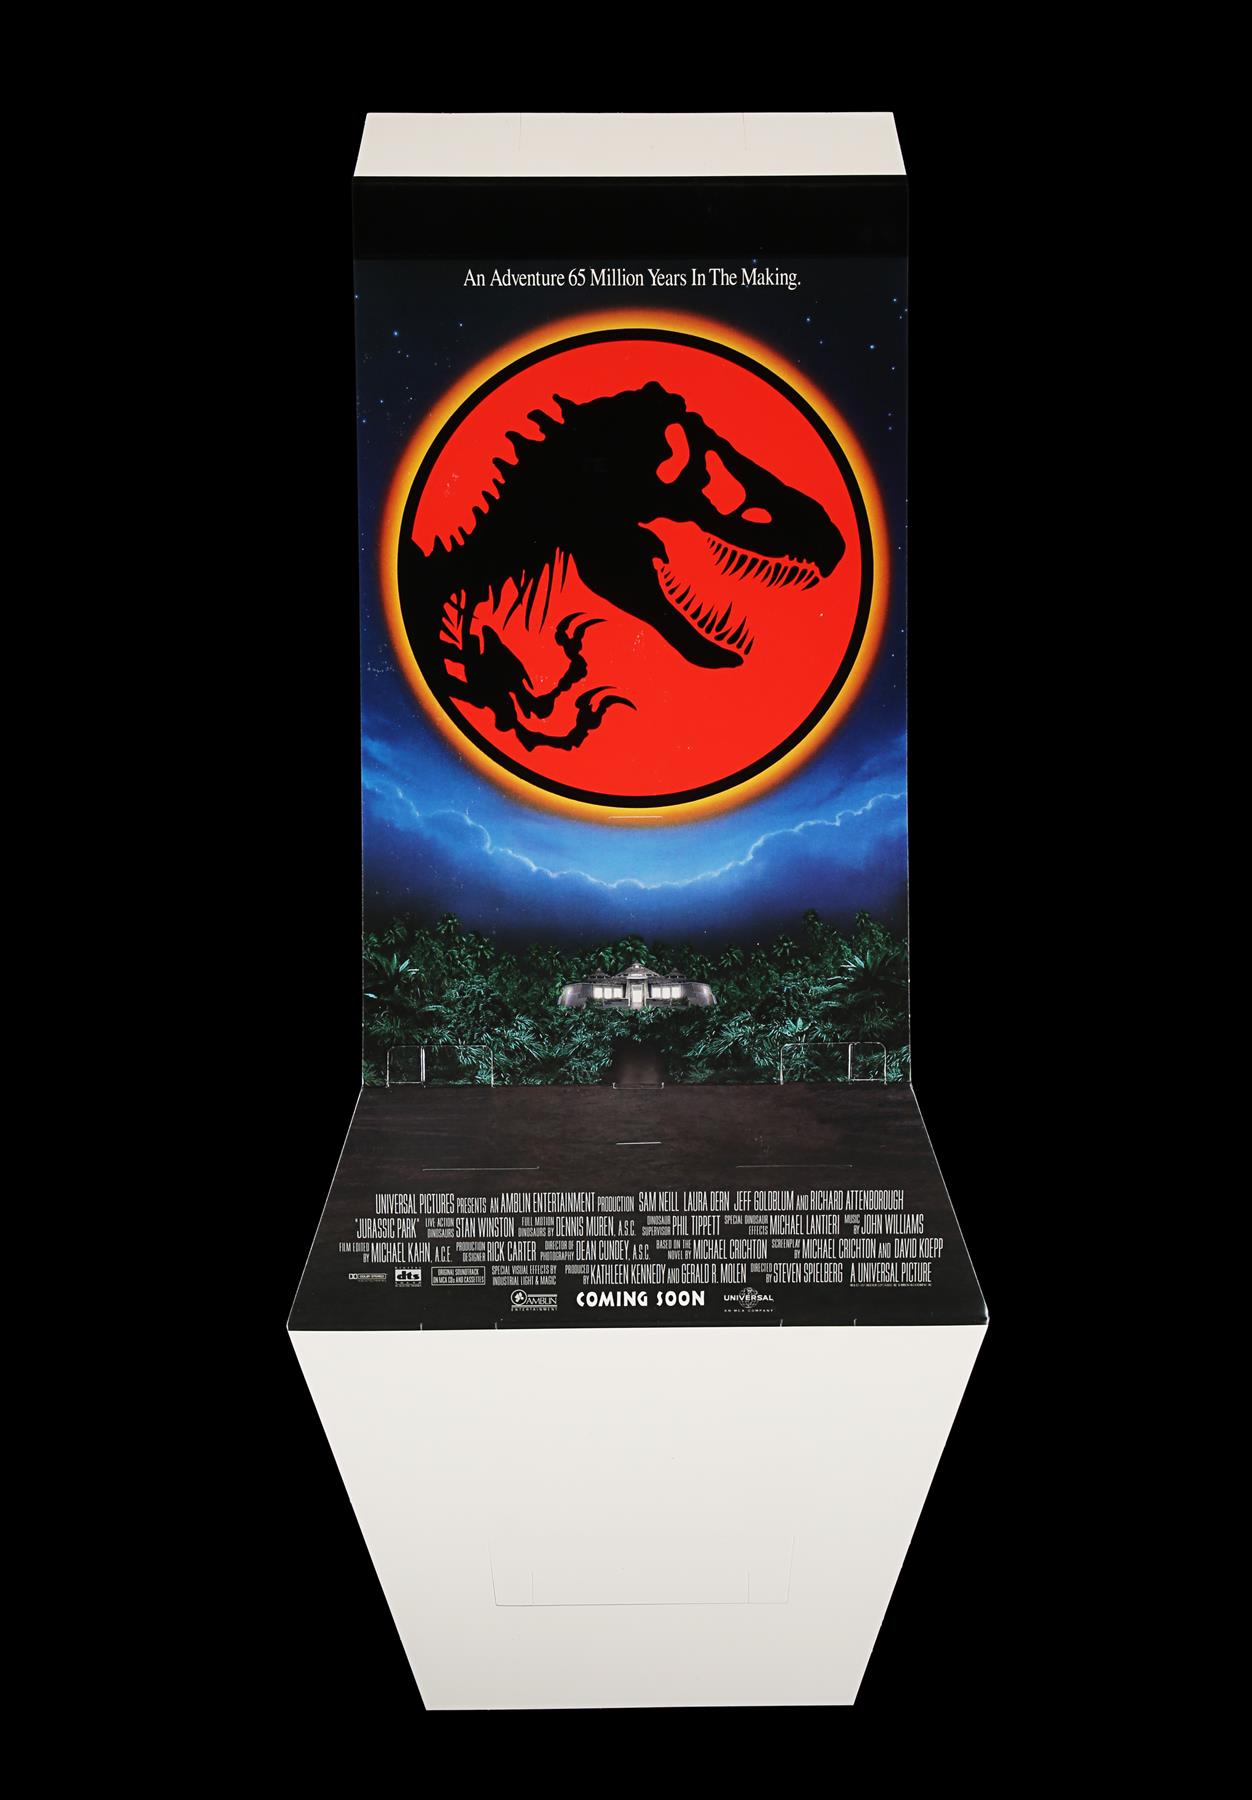 JURASSIC PARK (1993) - Promotional and In-Store Merchandise, 1993 - Image 7 of 8